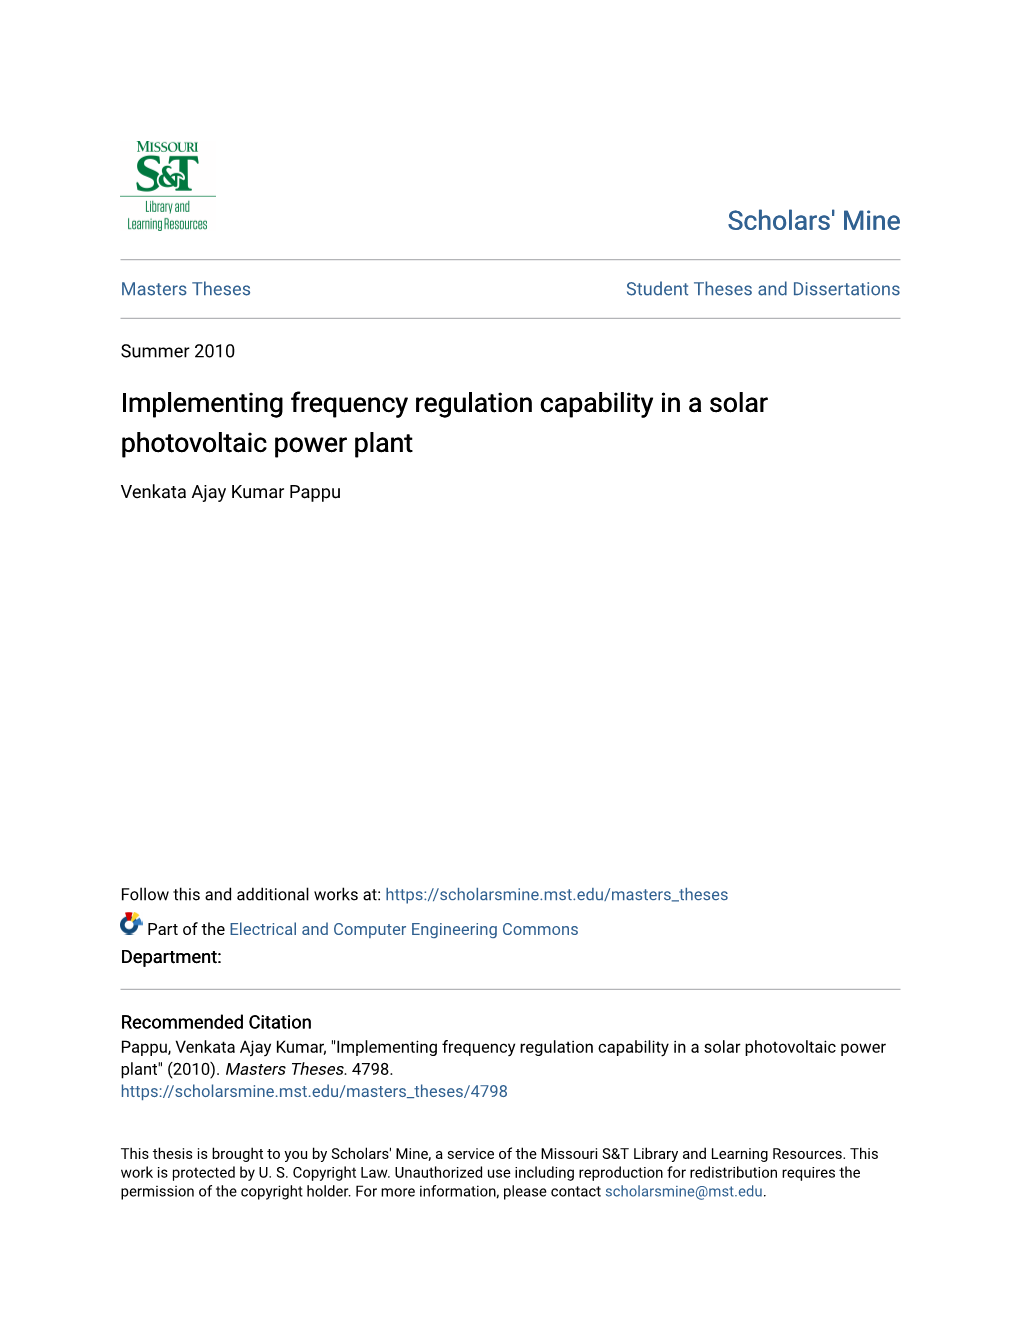 Implementing Frequency Regulation Capability in a Solar Photovoltaic Power Plant